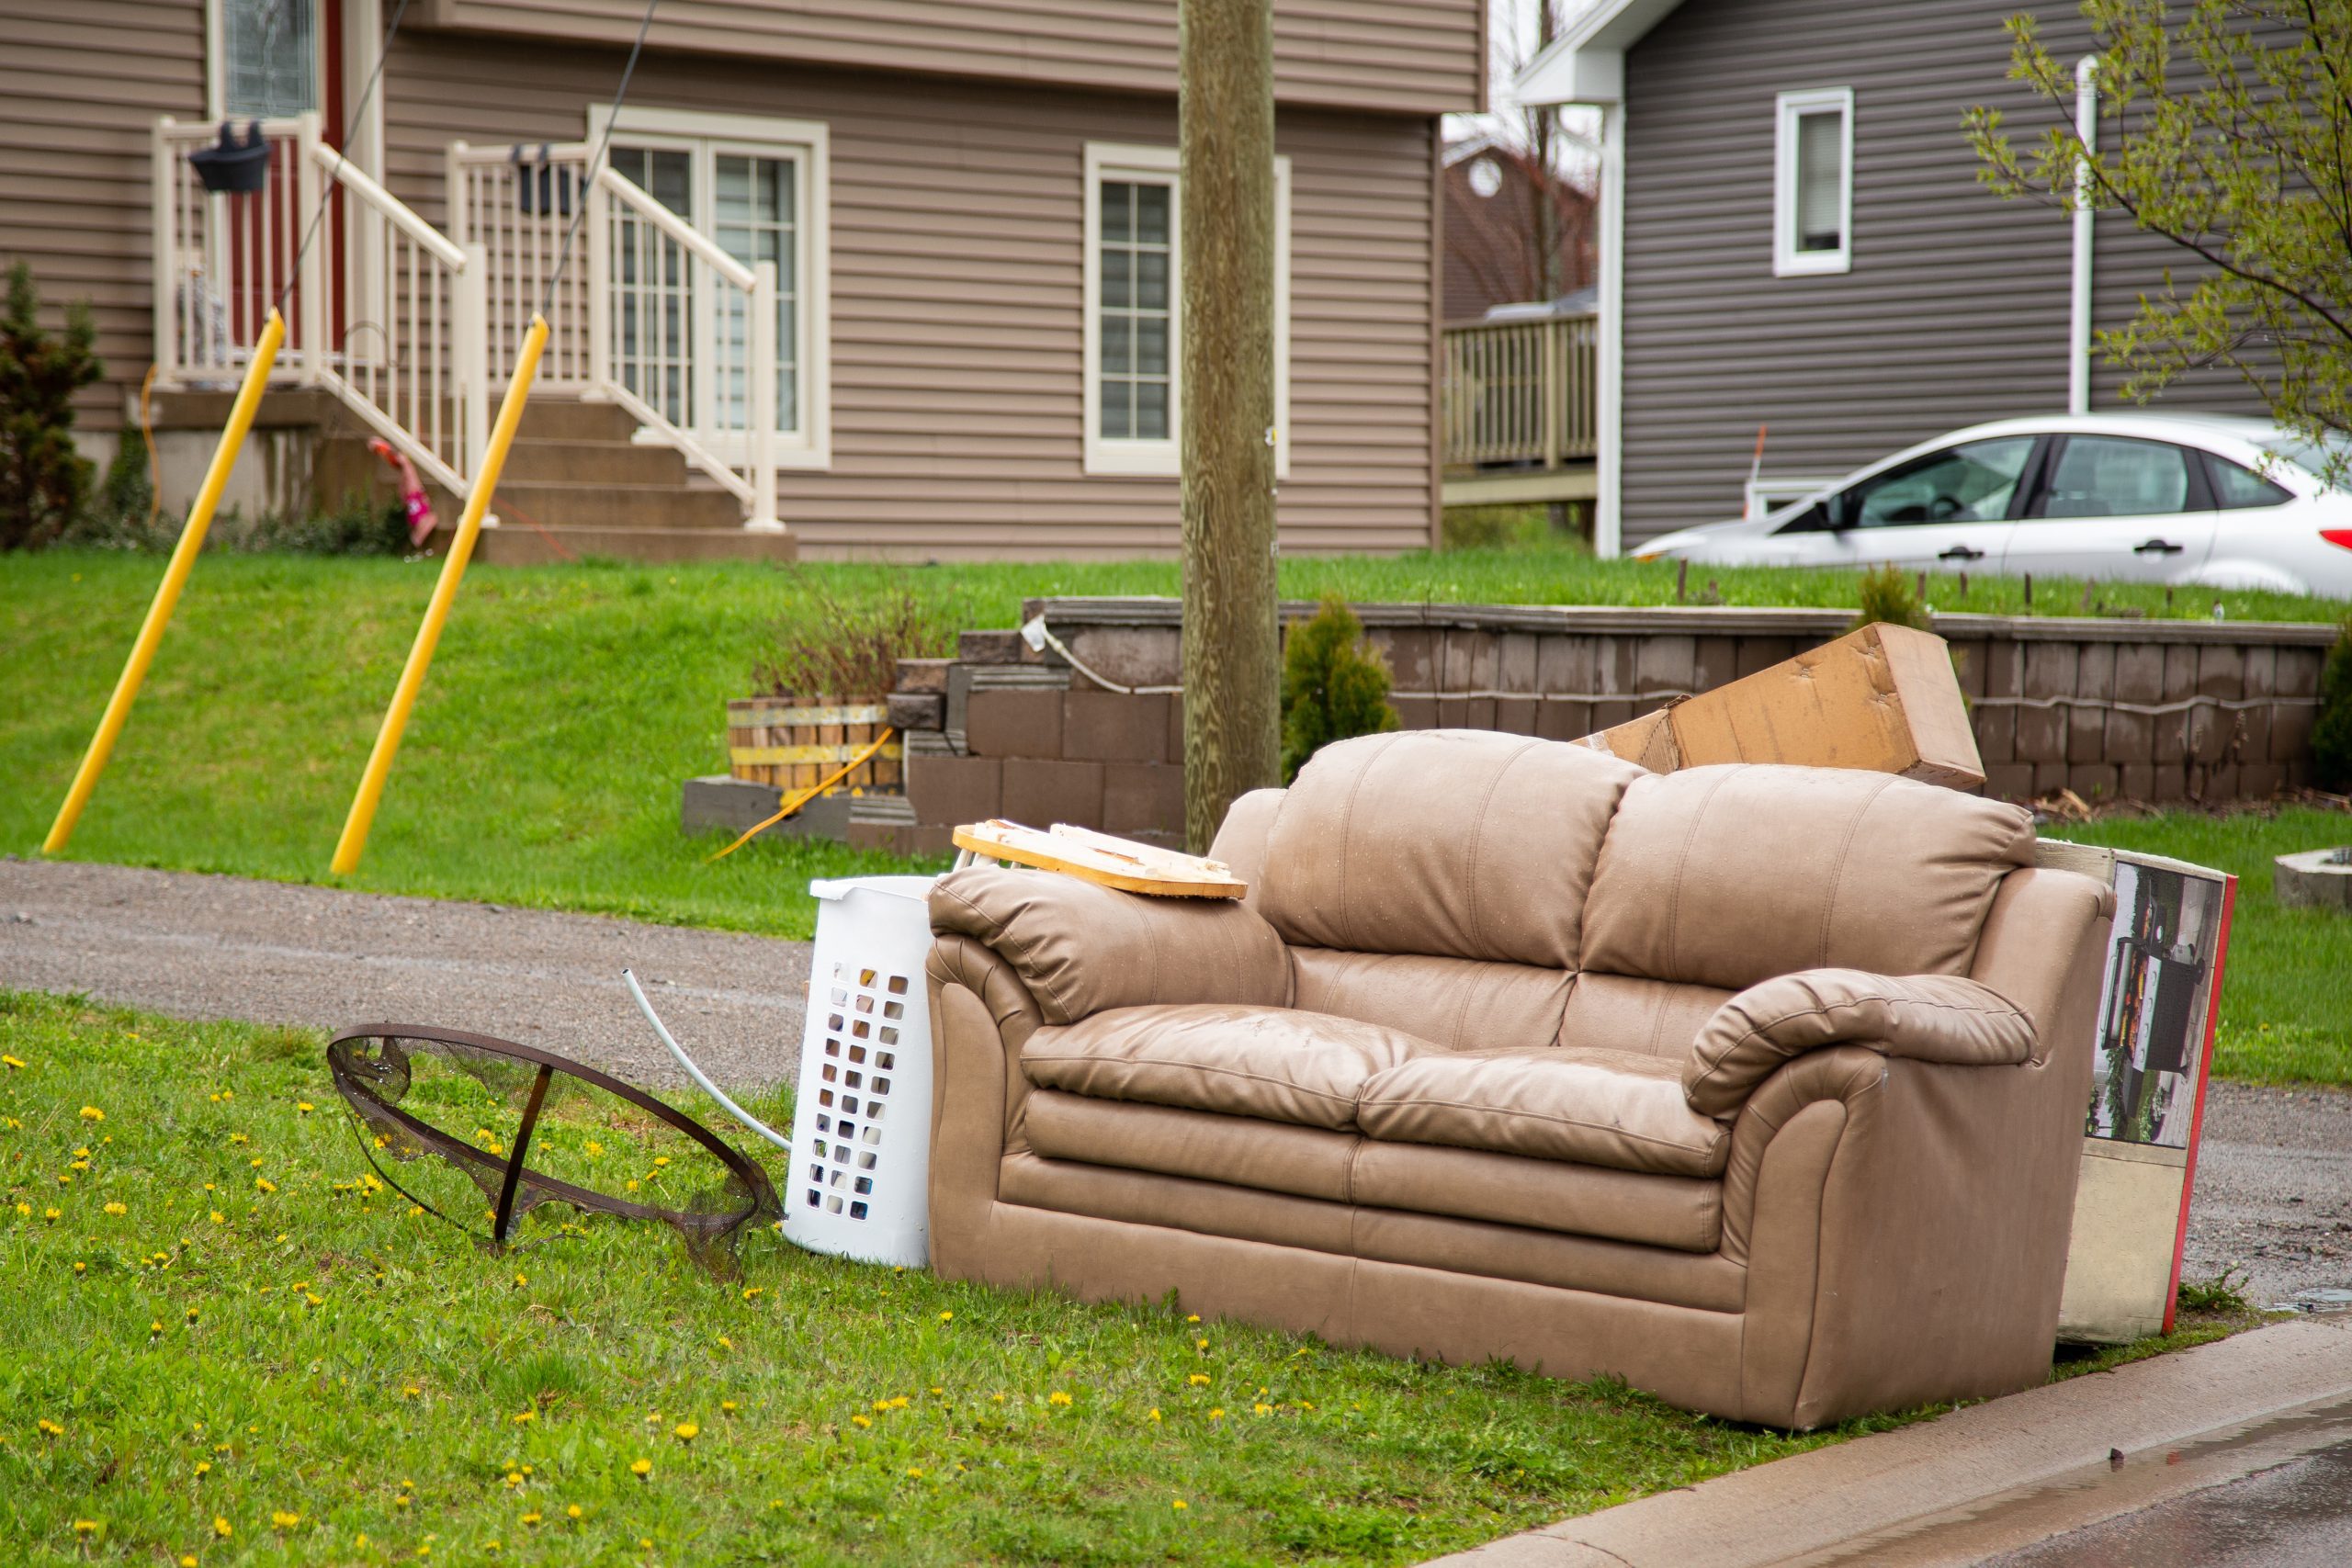 Bulk garbage including a brown couch sitting on a front lawn.